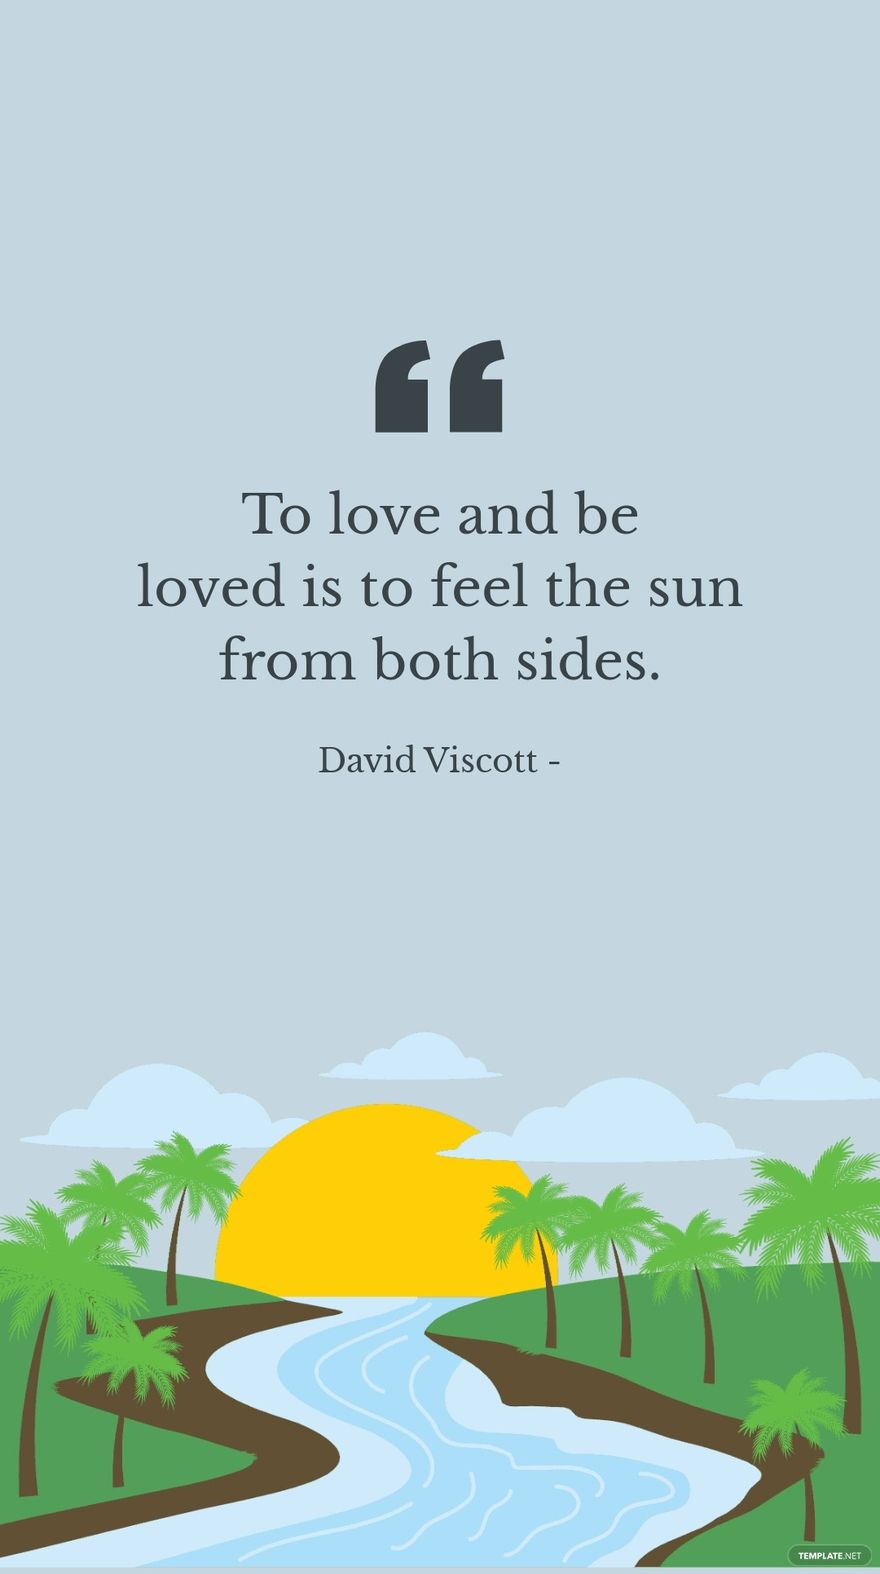 Free David Viscott - To love and be loved is to feel the sun from both sides. in JPG